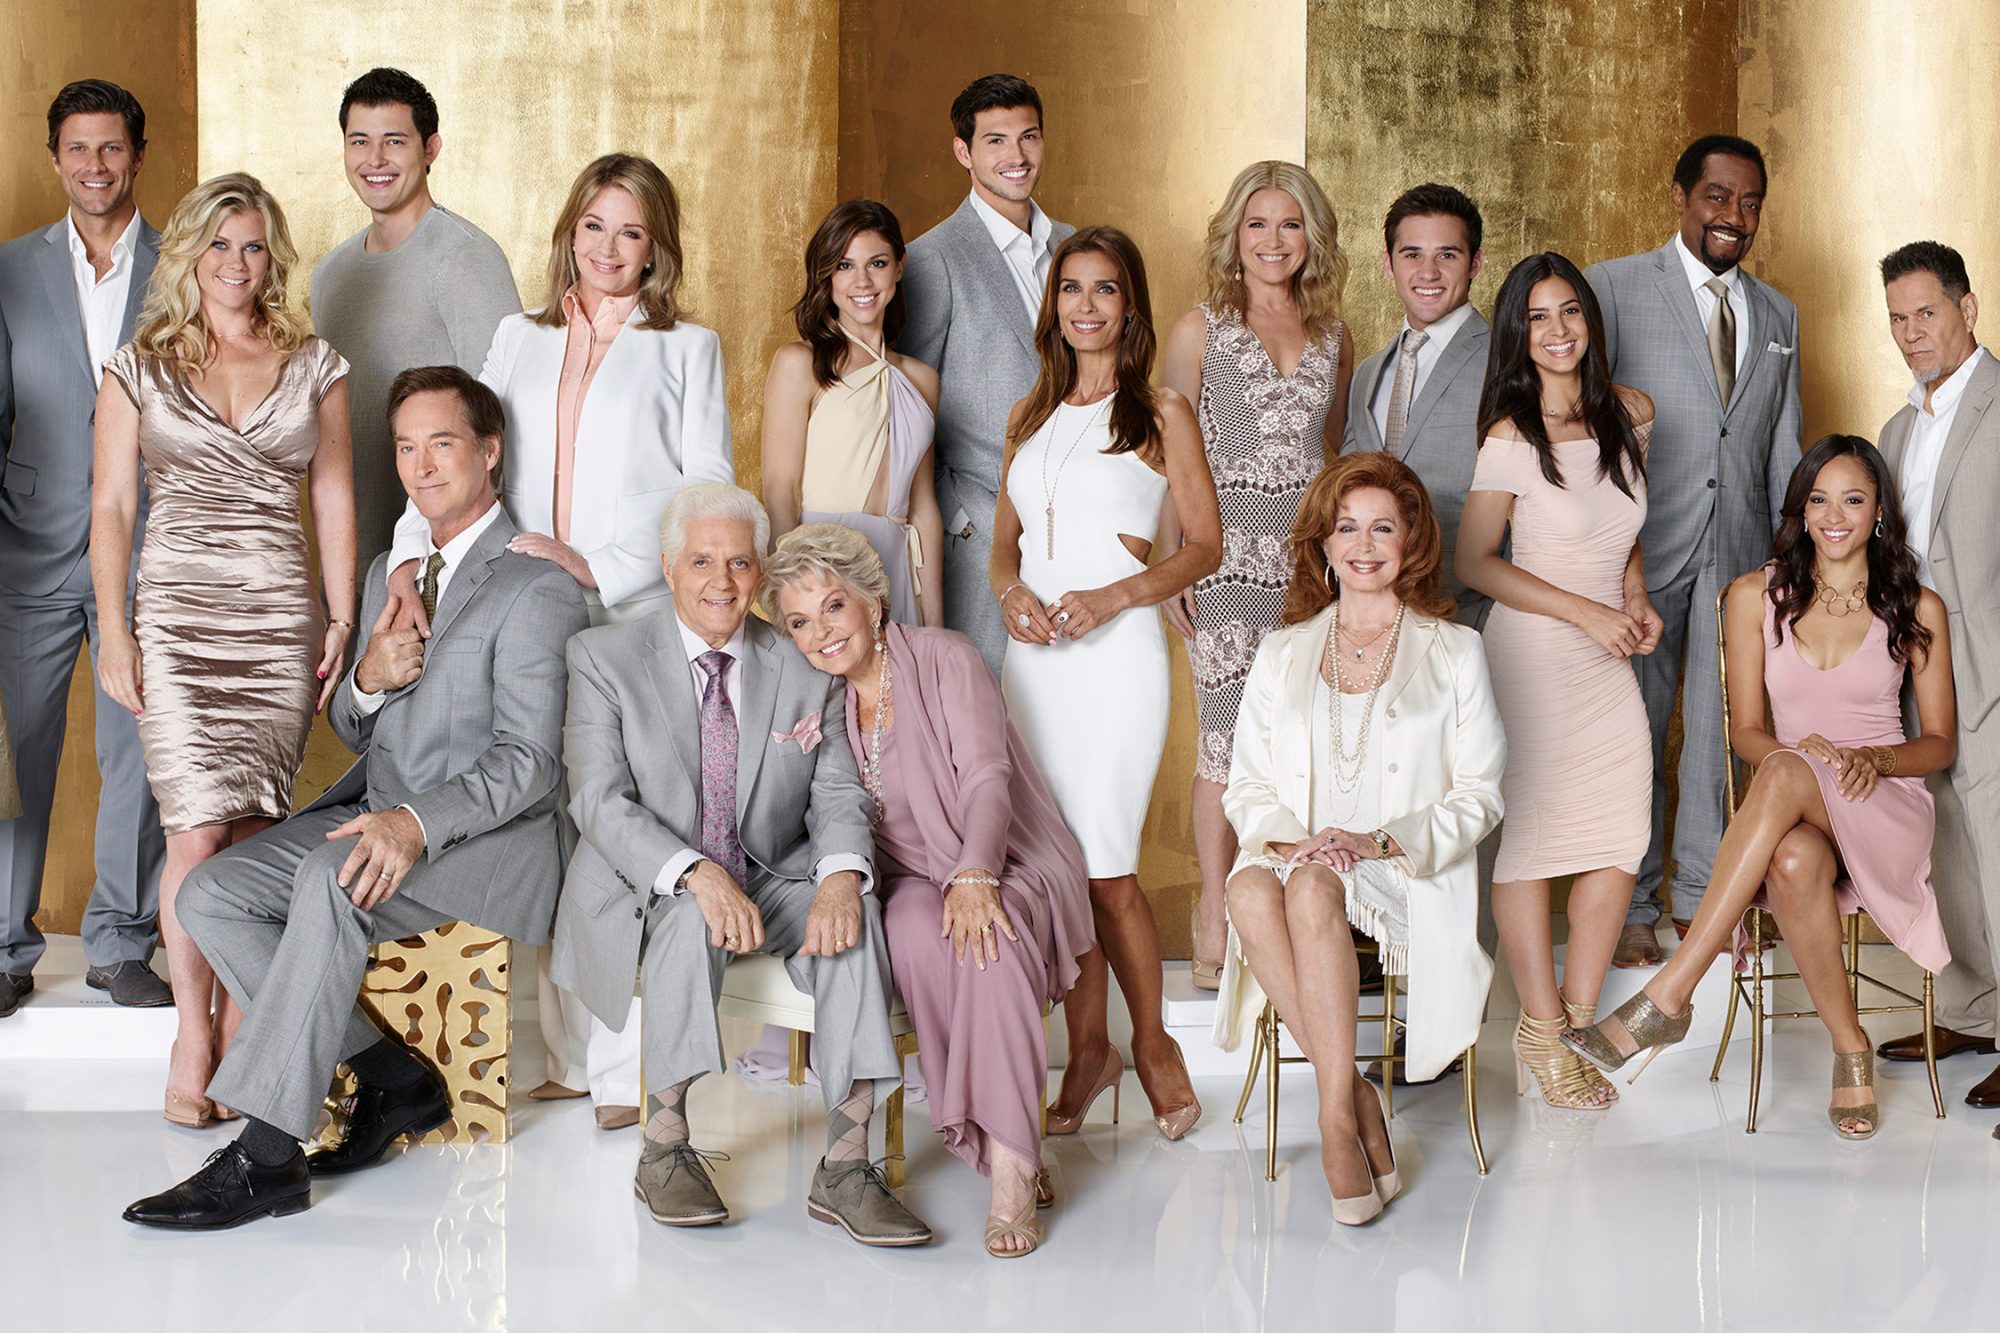 Days of Our Lives' Canceled: Is the Show Ending After 56 Years?